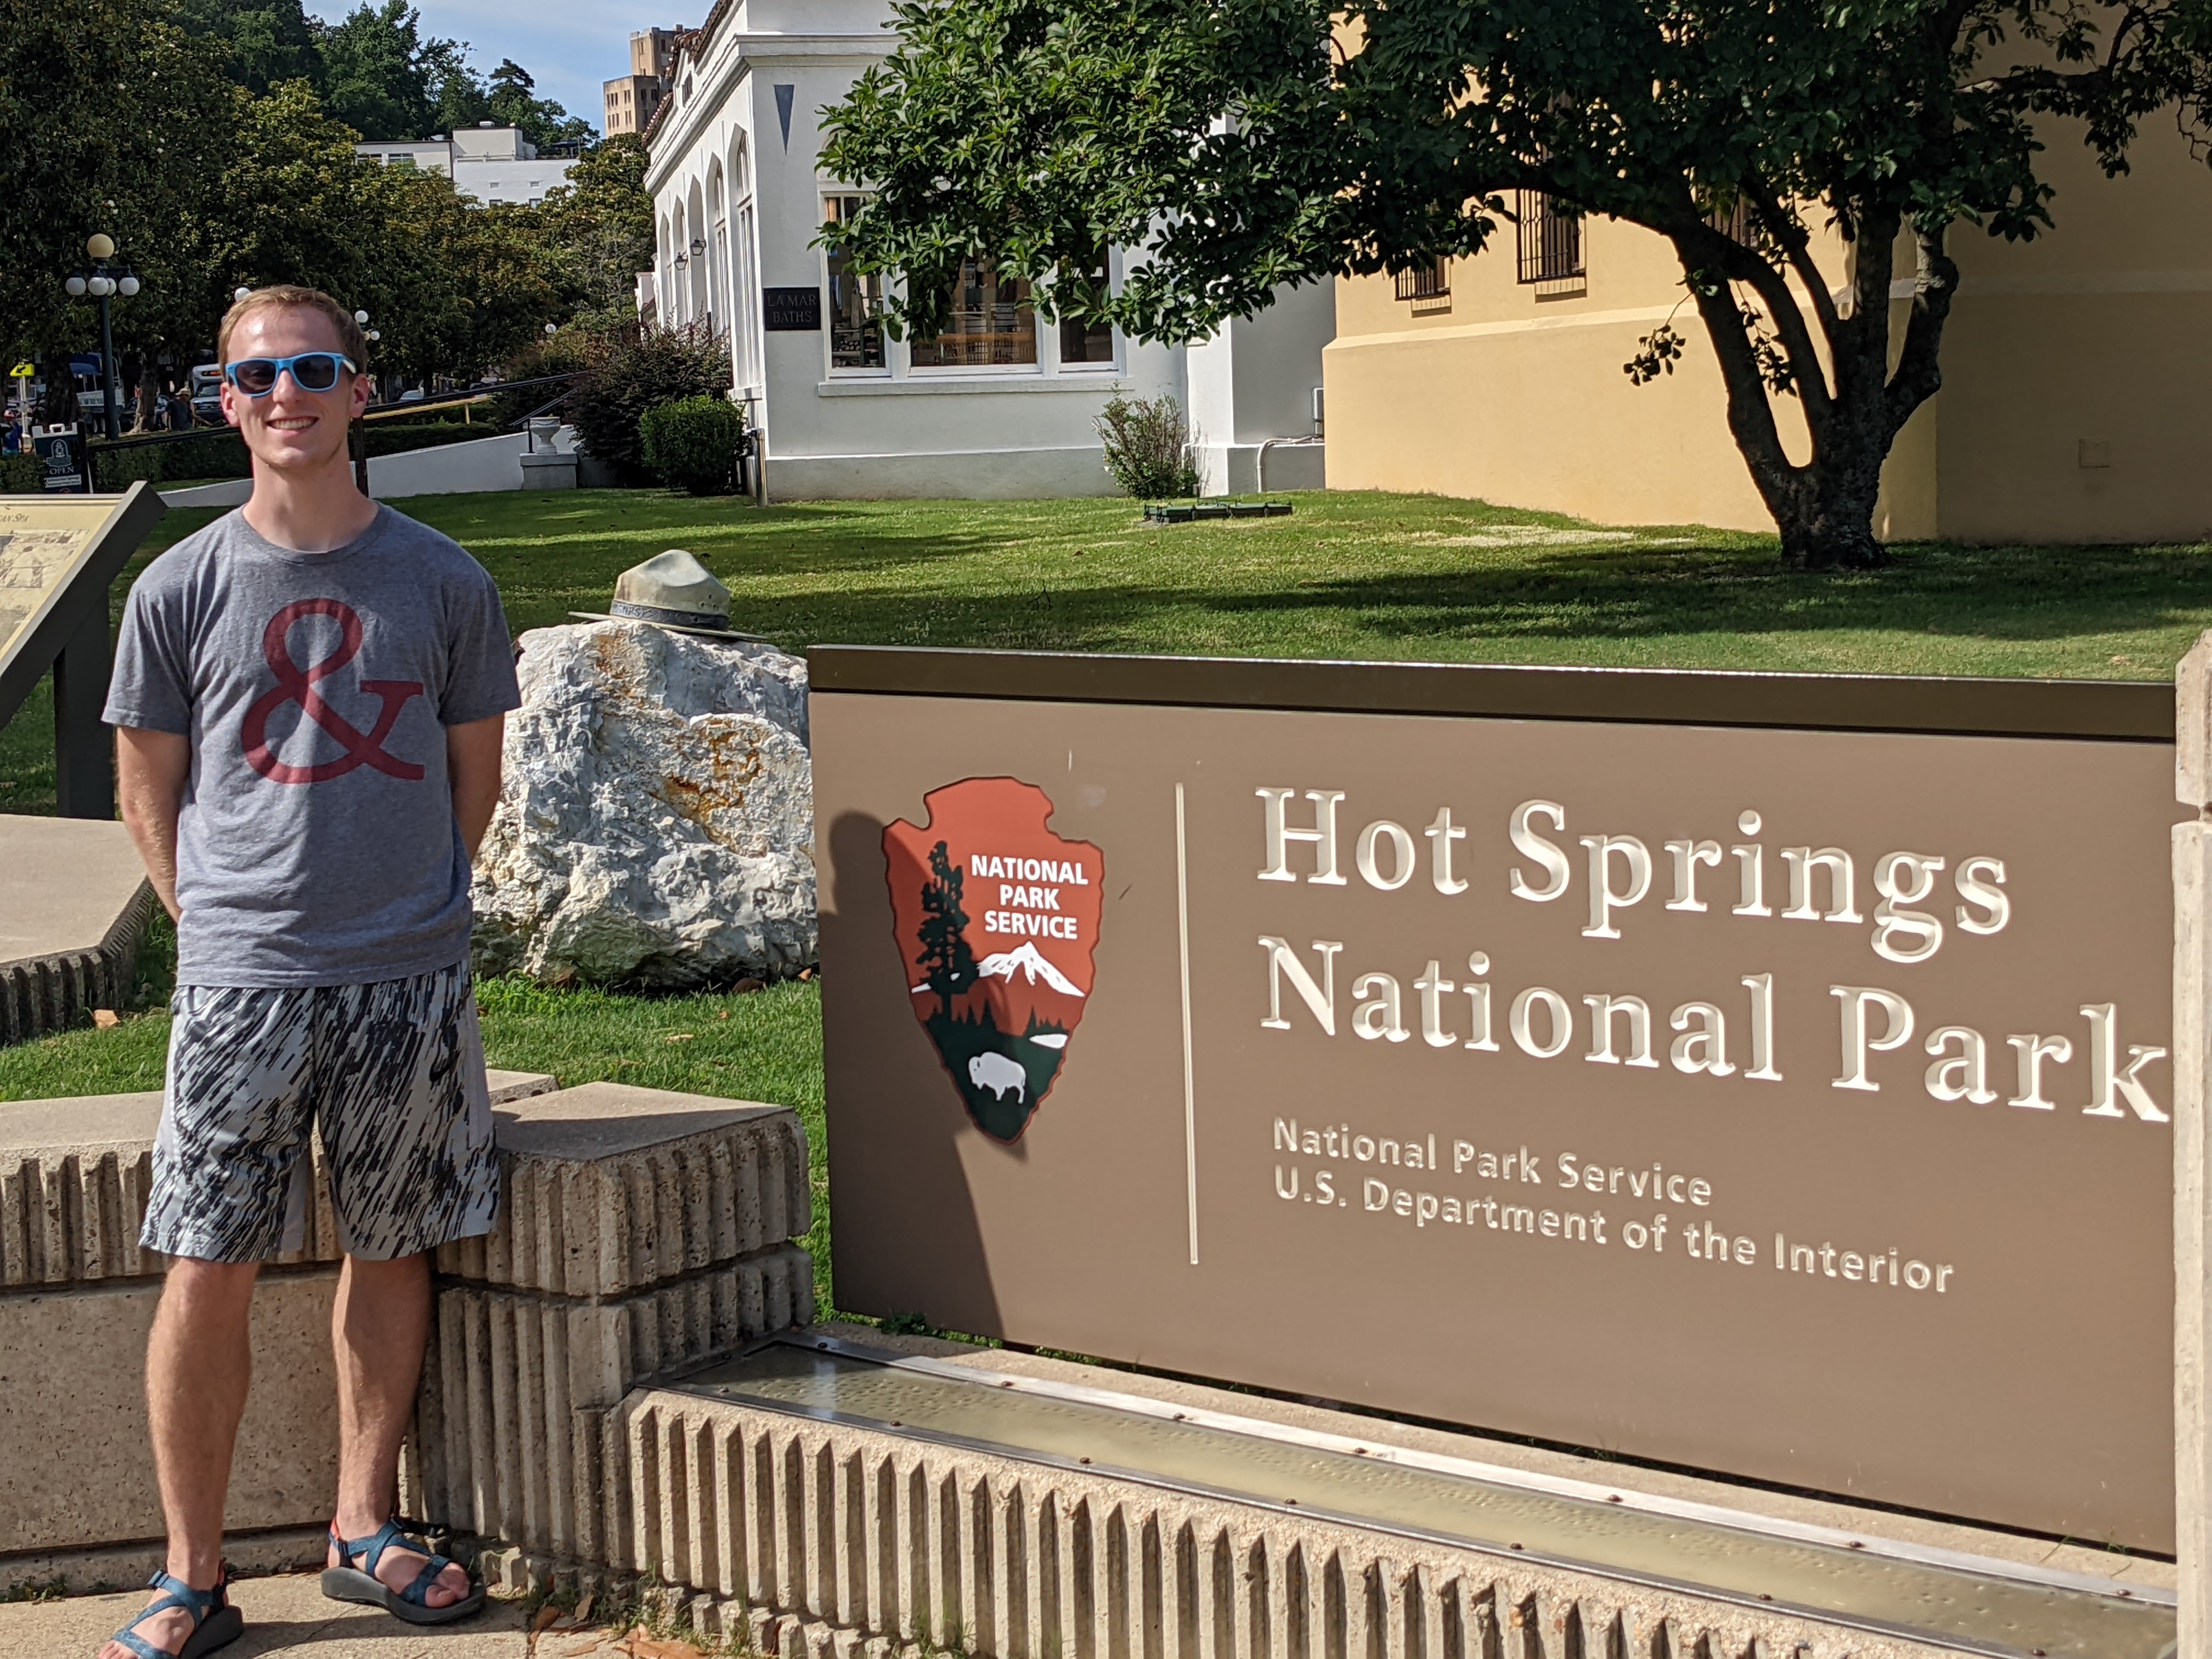 Kyle in front of Hot Springs National Park sign